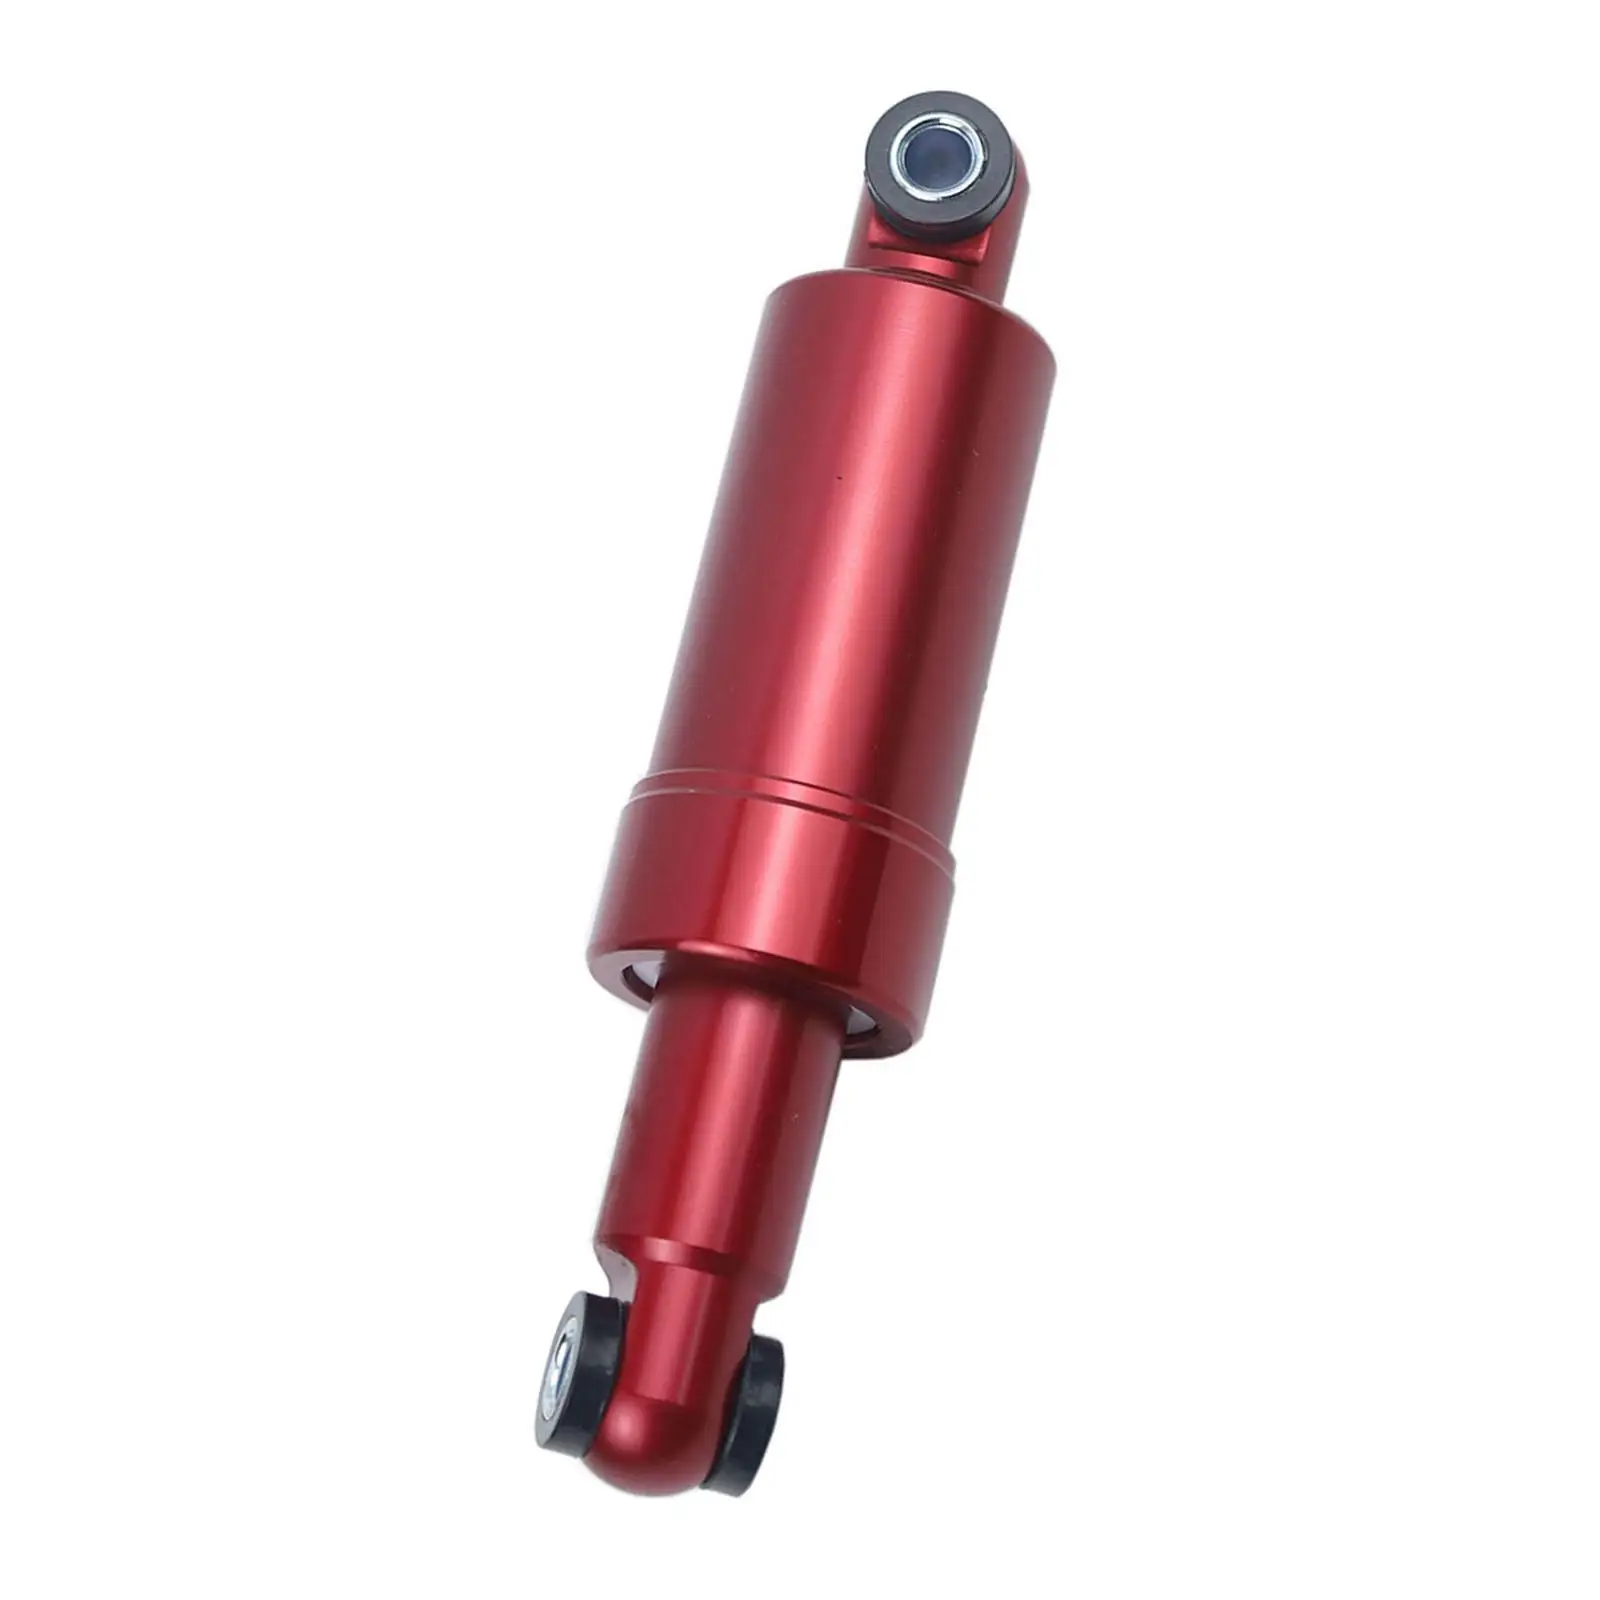 150mm Aluminum Alloy Suspension Shock Absorber Replace for Folding Scooter Mountain Bikes 49cc Pocket Bike Accessories